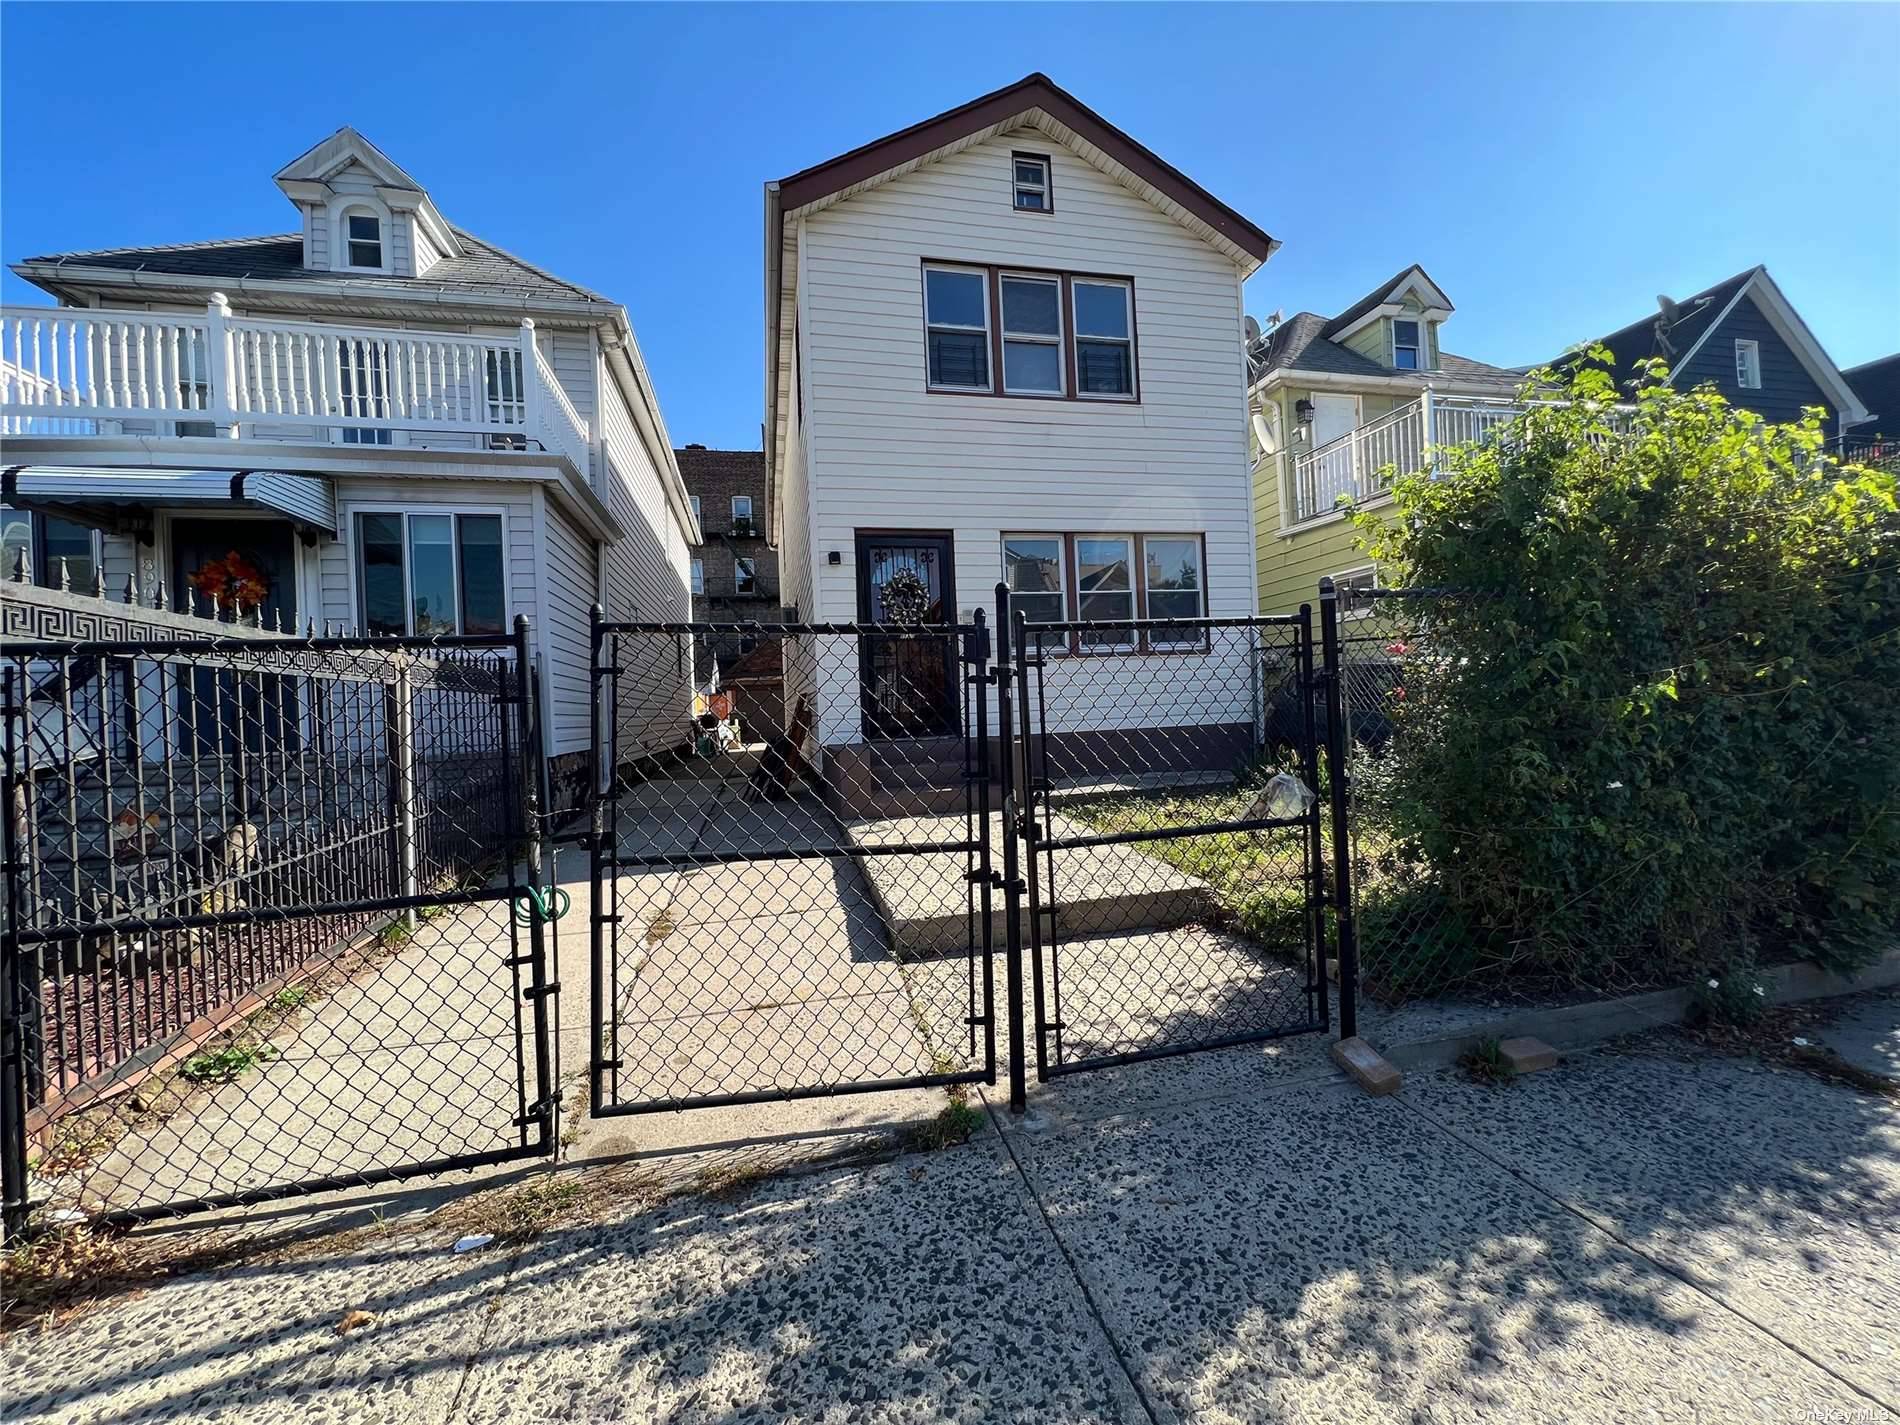 Beautiful 1 Family with a private driveway, a 1 car garage, 4 bedrooms, 2 full baths and a finished basement ; Conveniently located close to shopping, restaurants, banks and more.